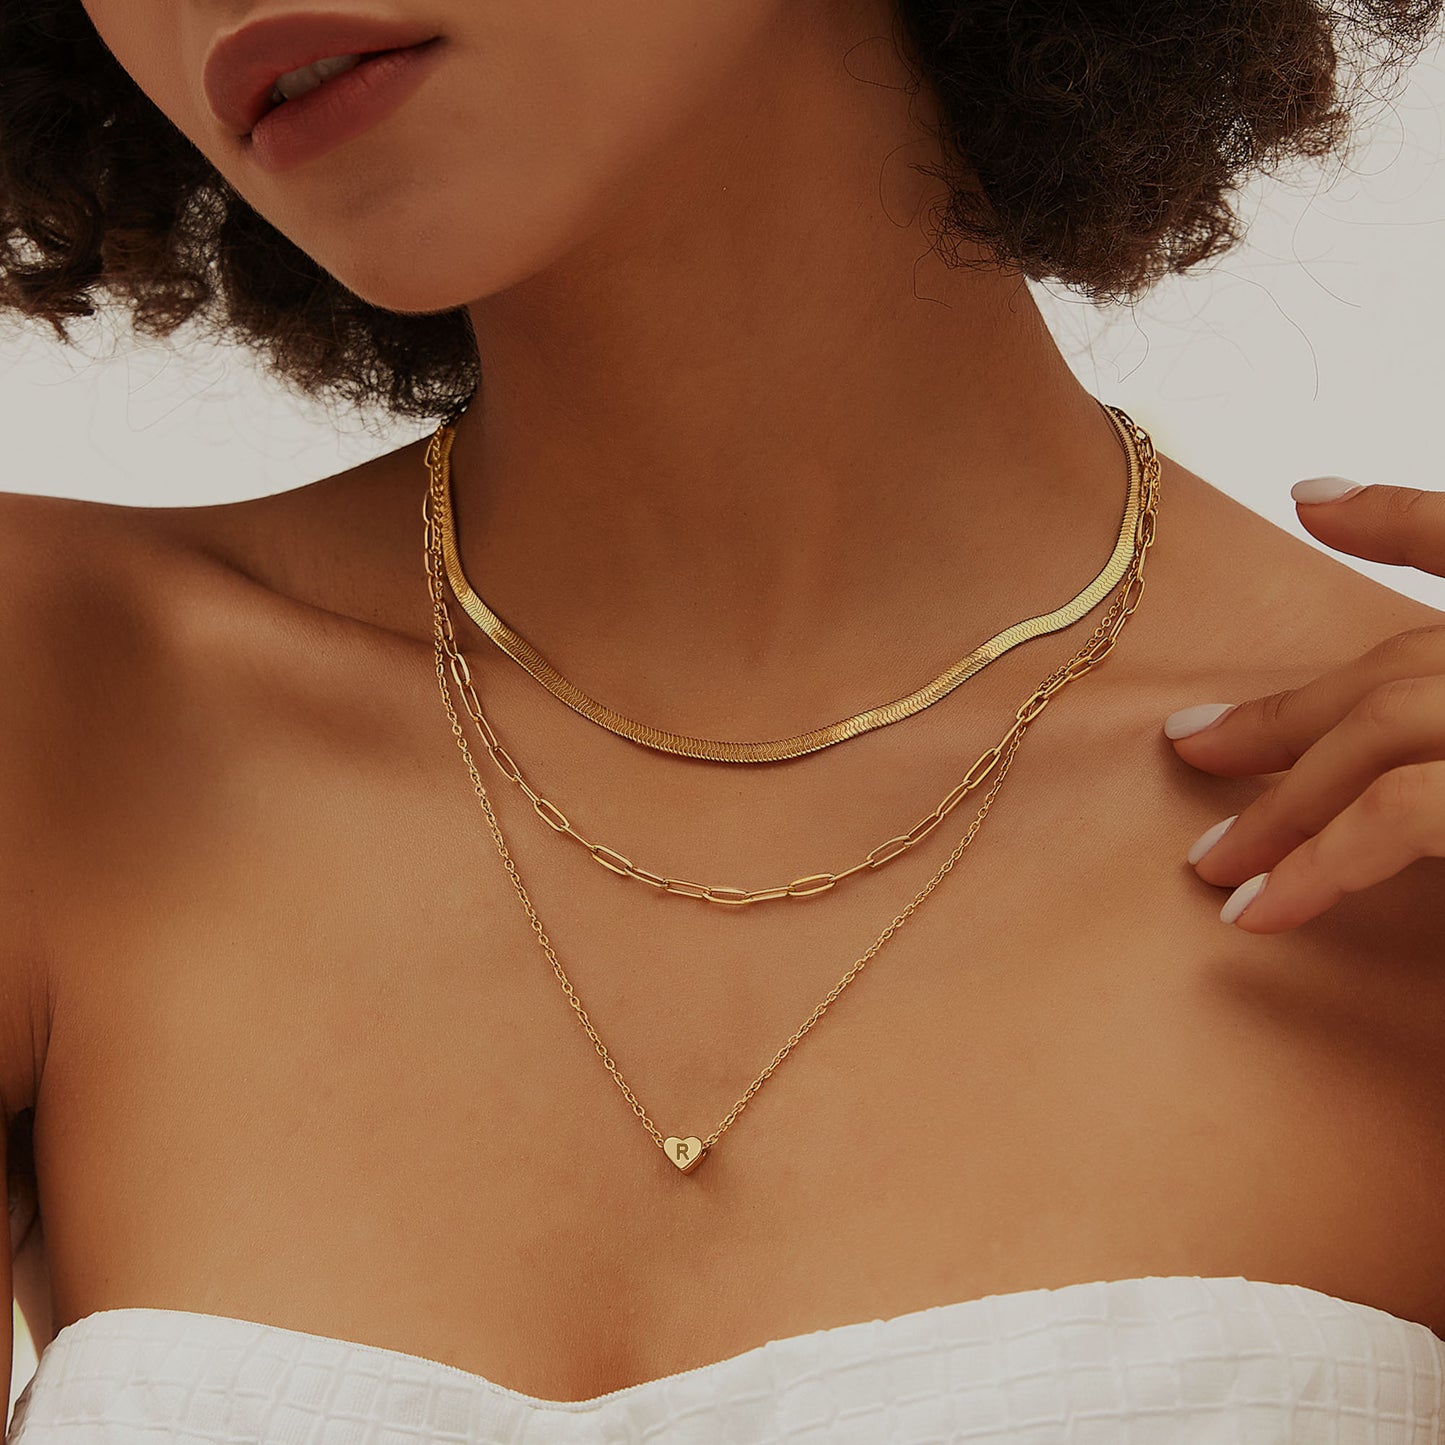 JSJOY Layered Initial Necklaces for Women, Gold Initial Heart Pendant Necklace Cute Letter A-Z Necklaces Tiny Initial Monogram Snake Choker Dainty Paperclip Chain Necklace for Girls